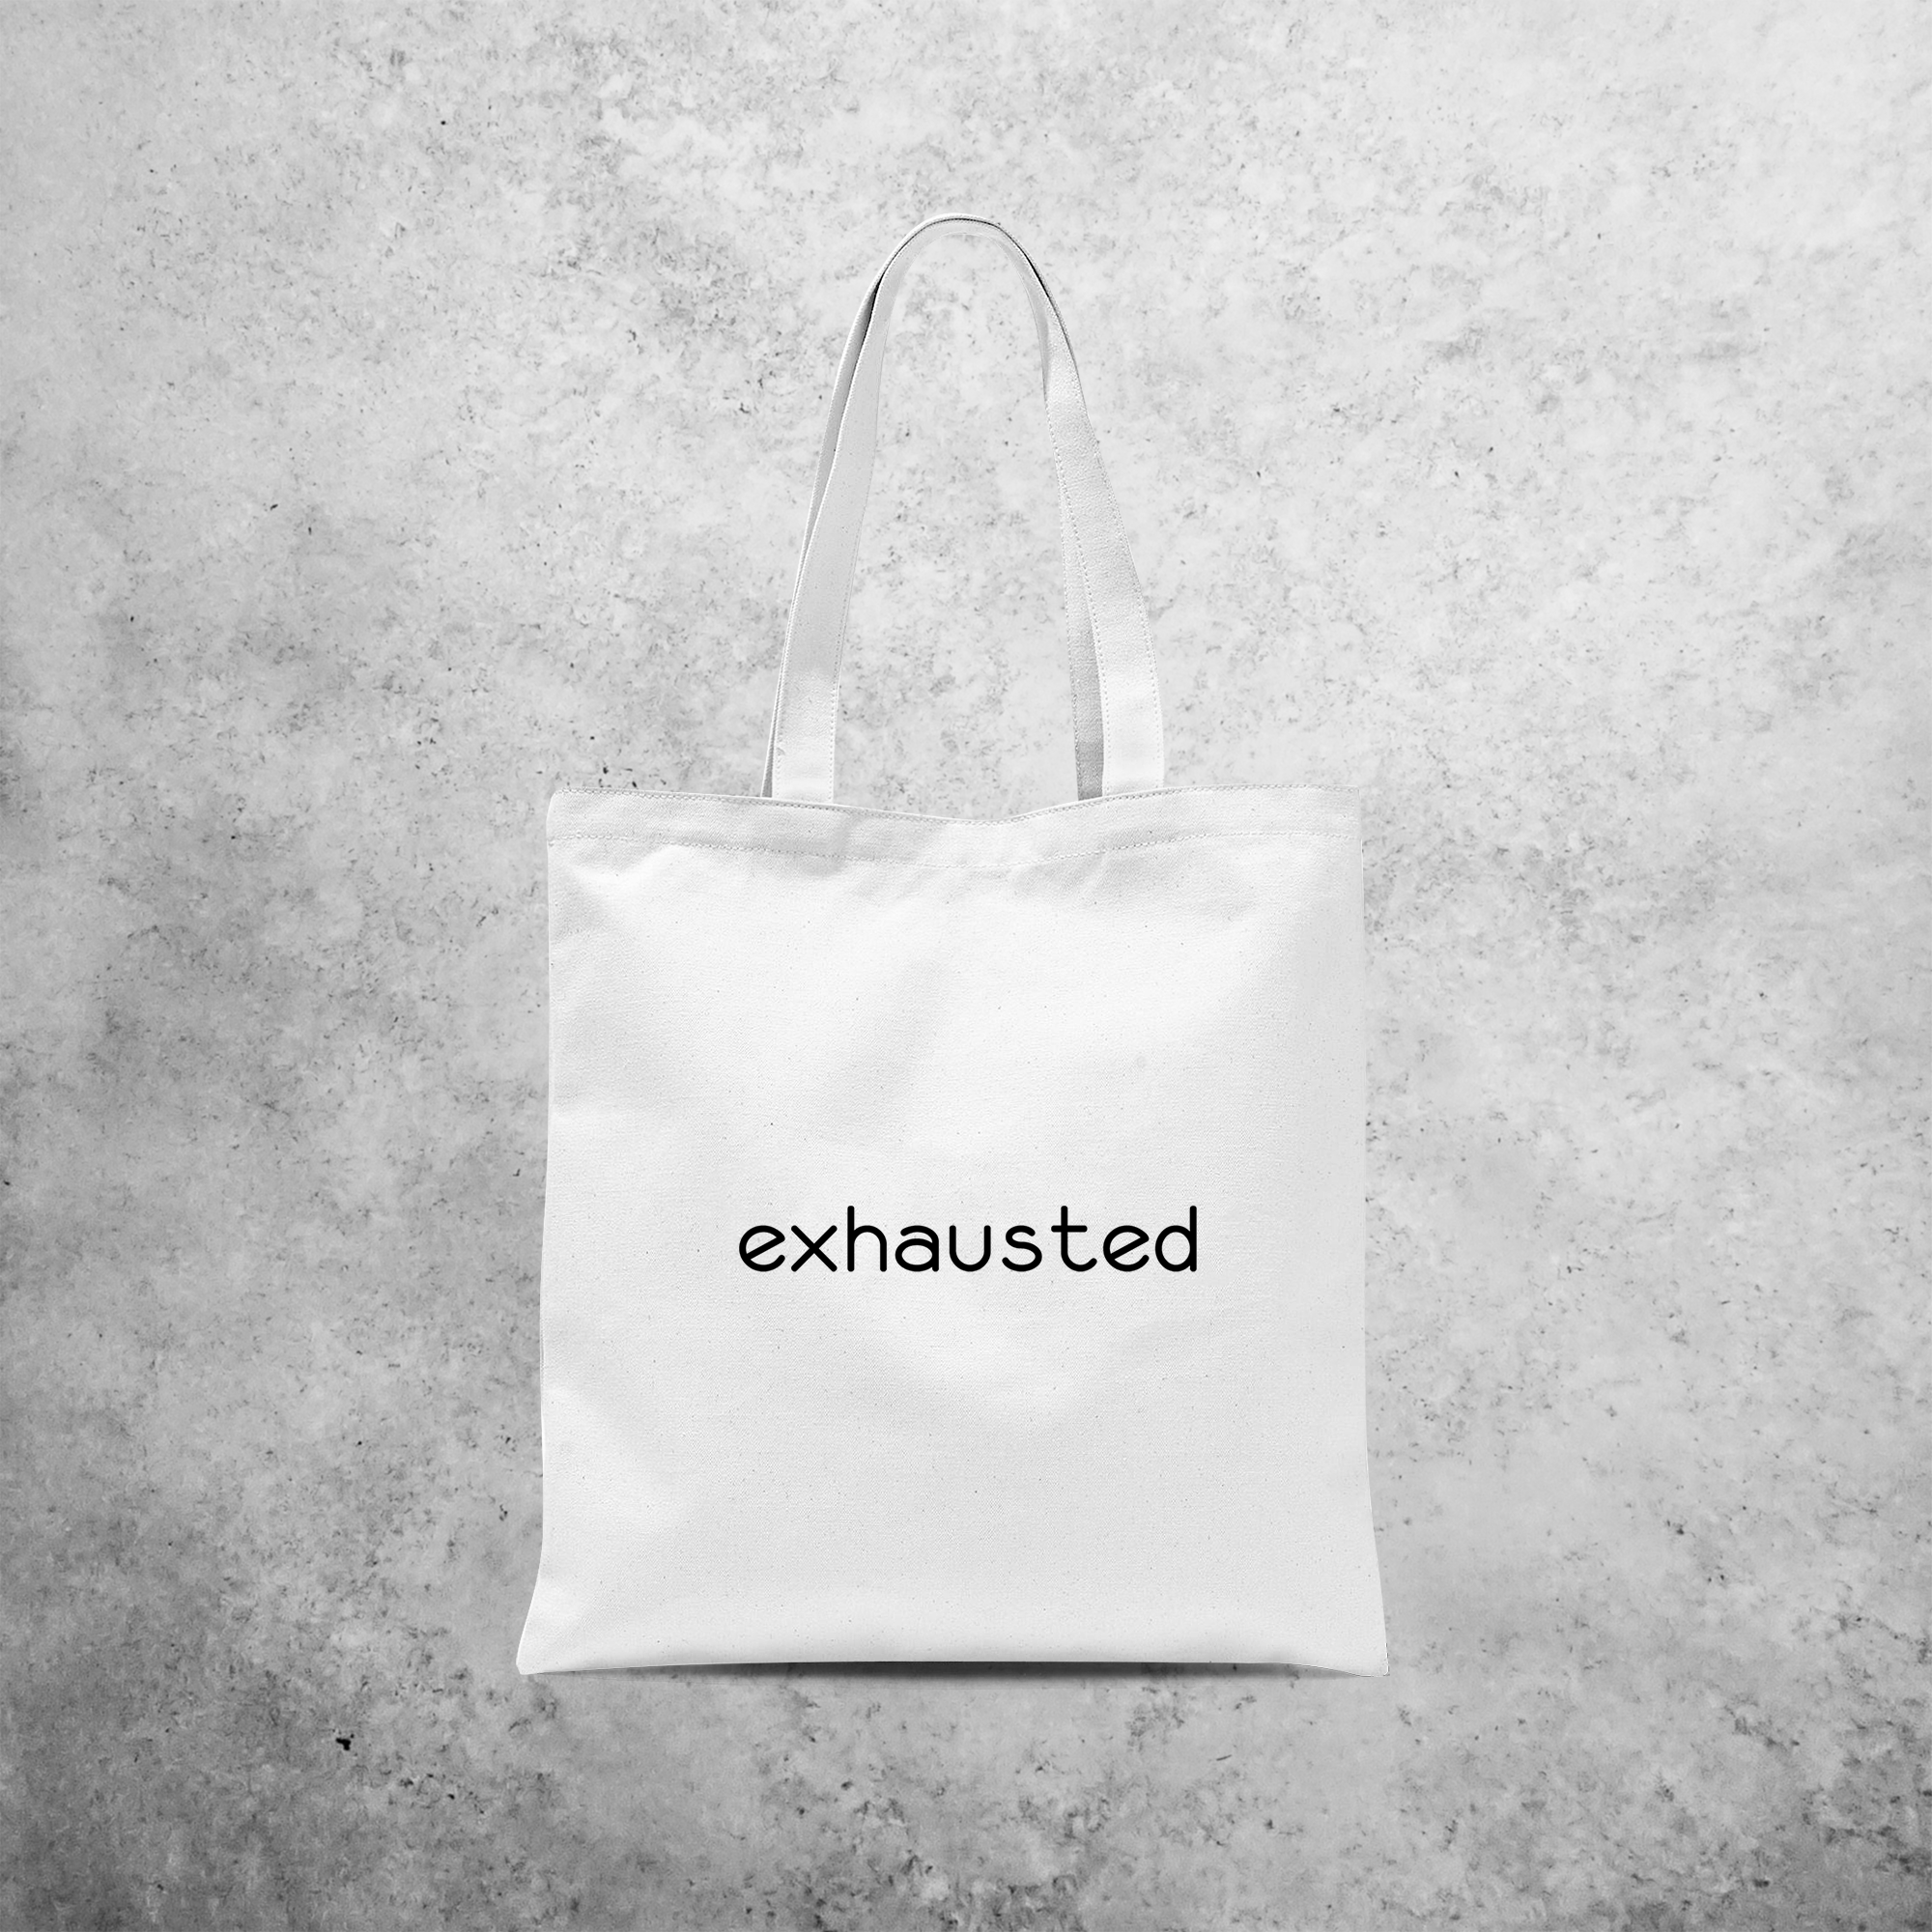 'Exhausted' tote bag